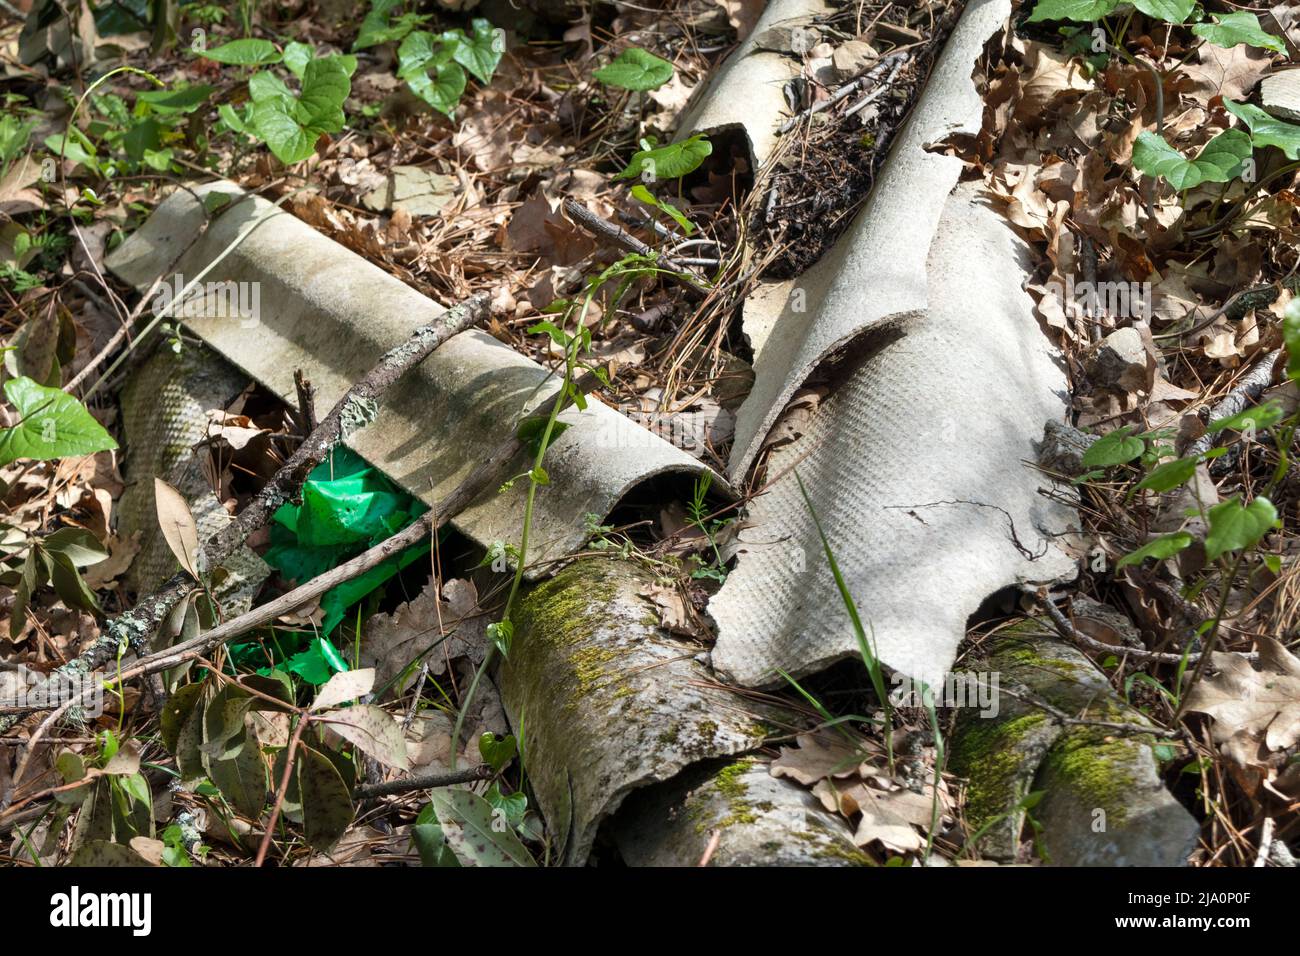 Asbestos Roofing Material Dumped in a Woodland Environment at the side of a Road. Stock Photo